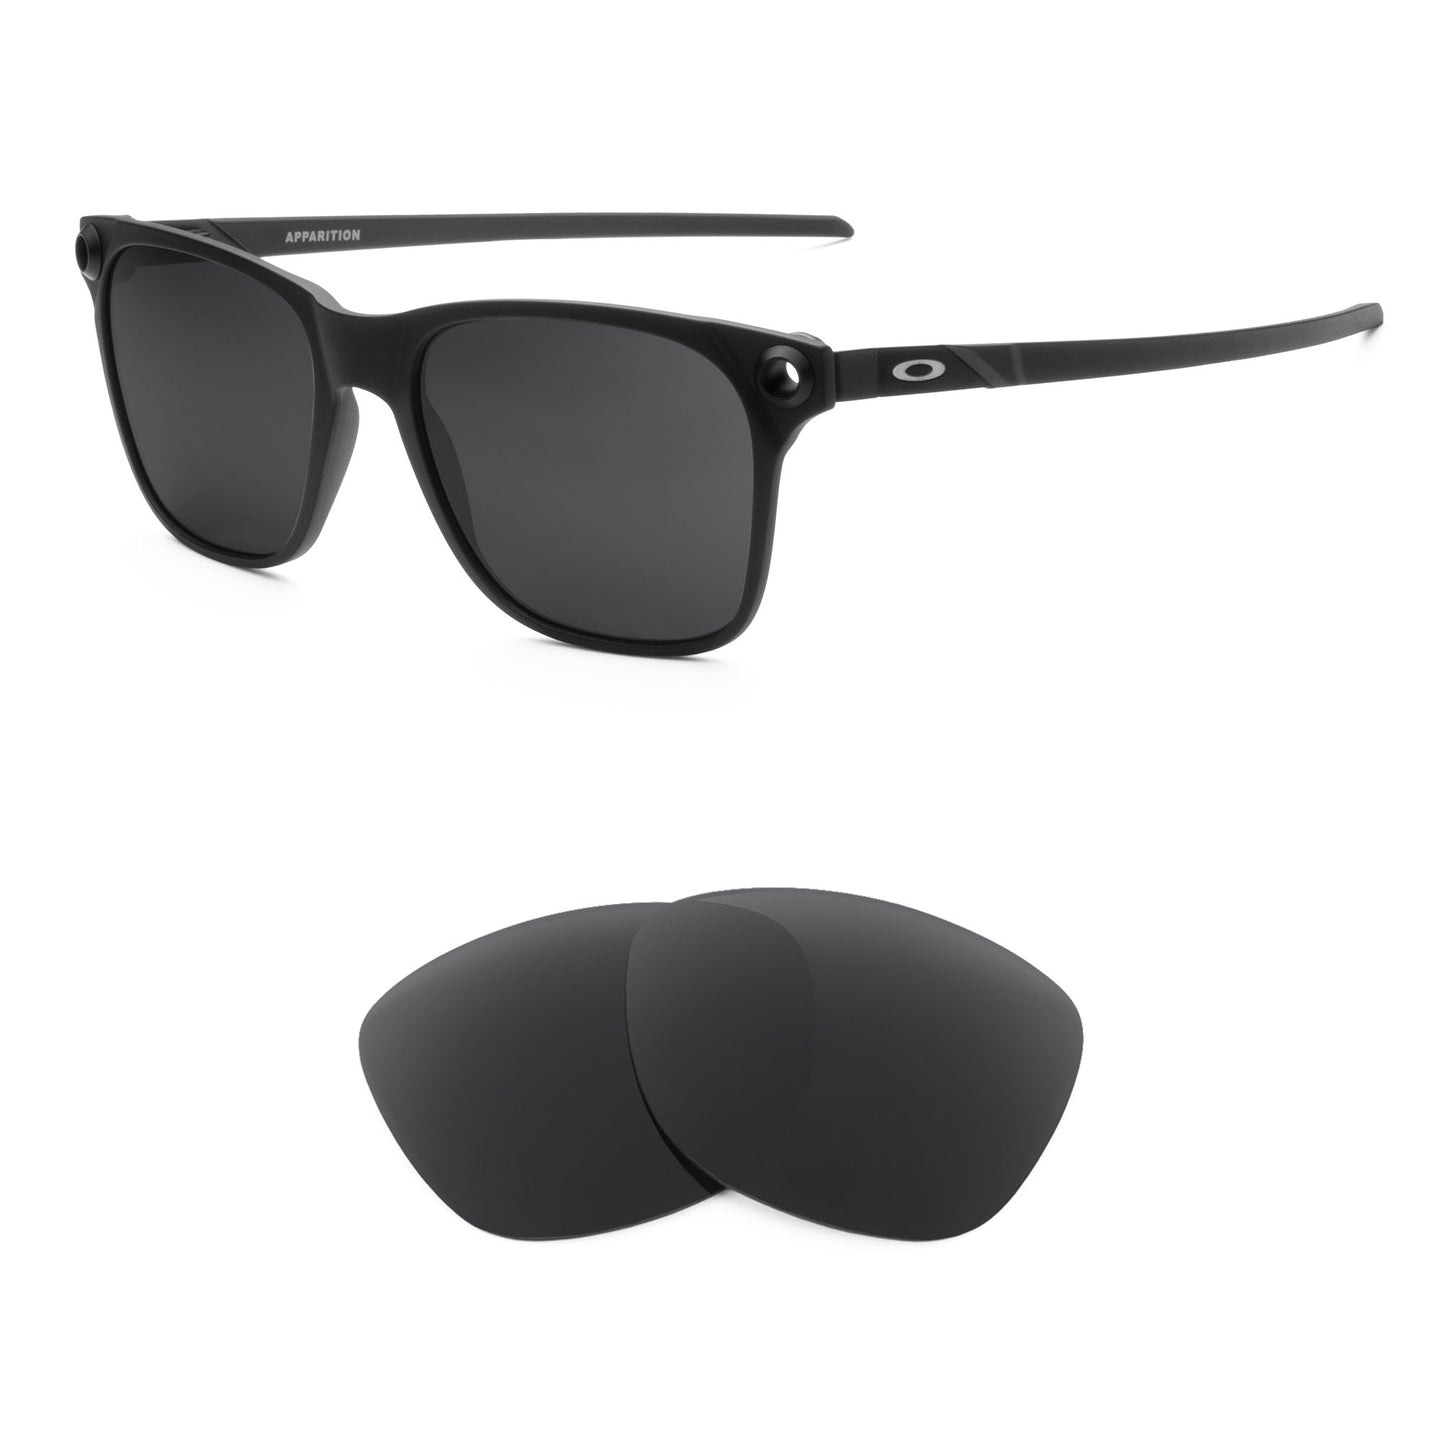 Oakley Apparition sunglasses with replacement lenses